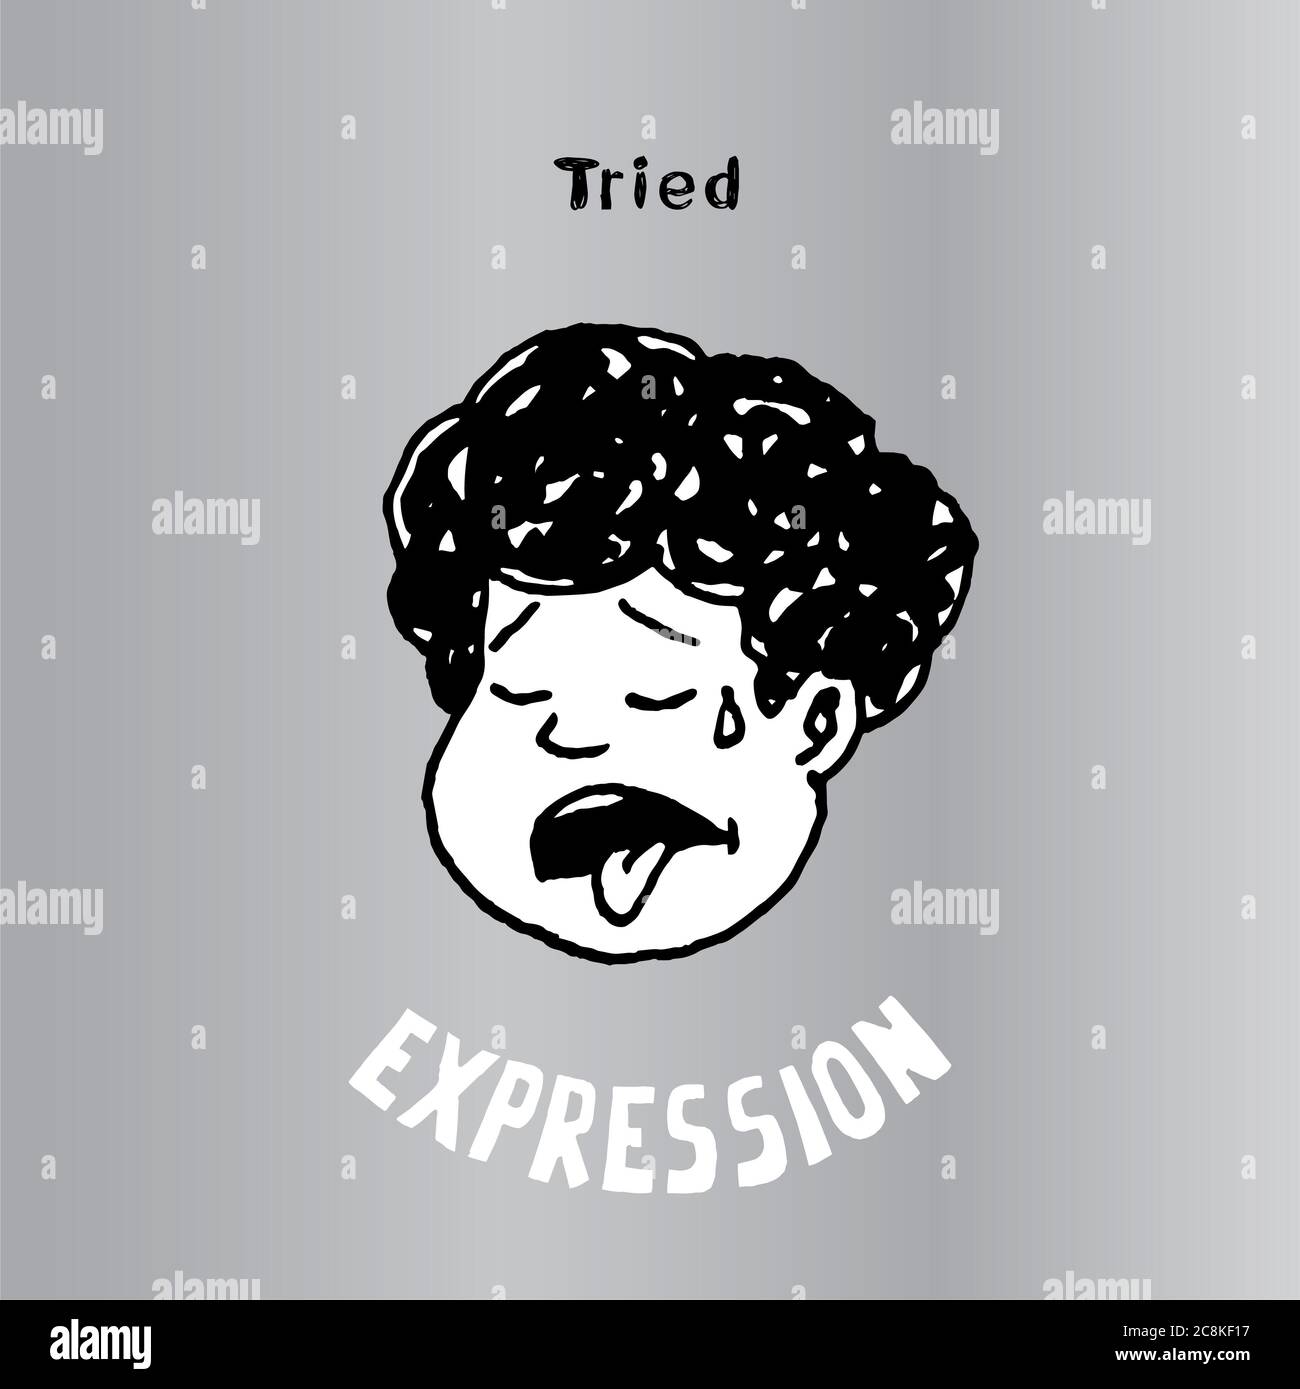 Tired kid face vector illustration. Interesting cartoon character. Used as emoticons and emojis. Stock Photo